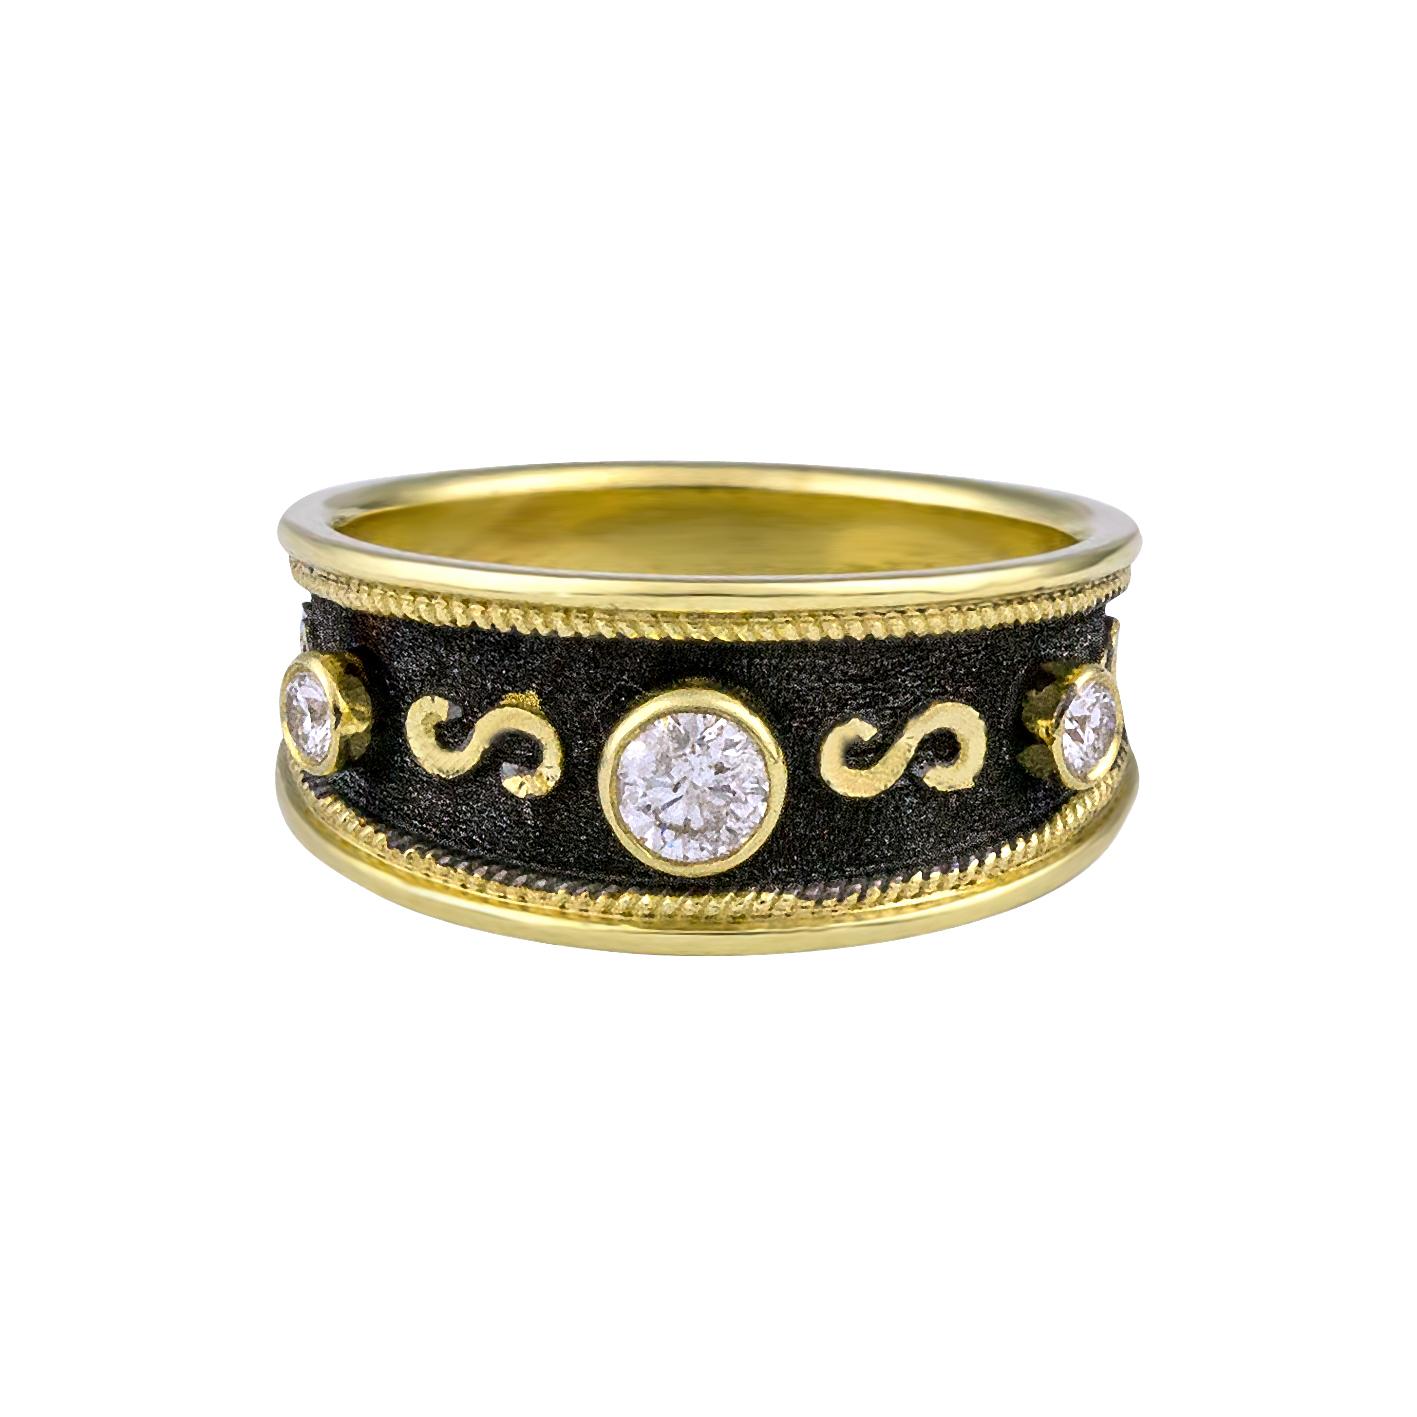 S.Georgios design ring handmade from solid 18 Carat Yellow Gold. This graduated ring is microscopically decorated with gold wires. Granulated details contrast with Byzantine velvet background finished with Black Rhodium. The gorgeous piece features